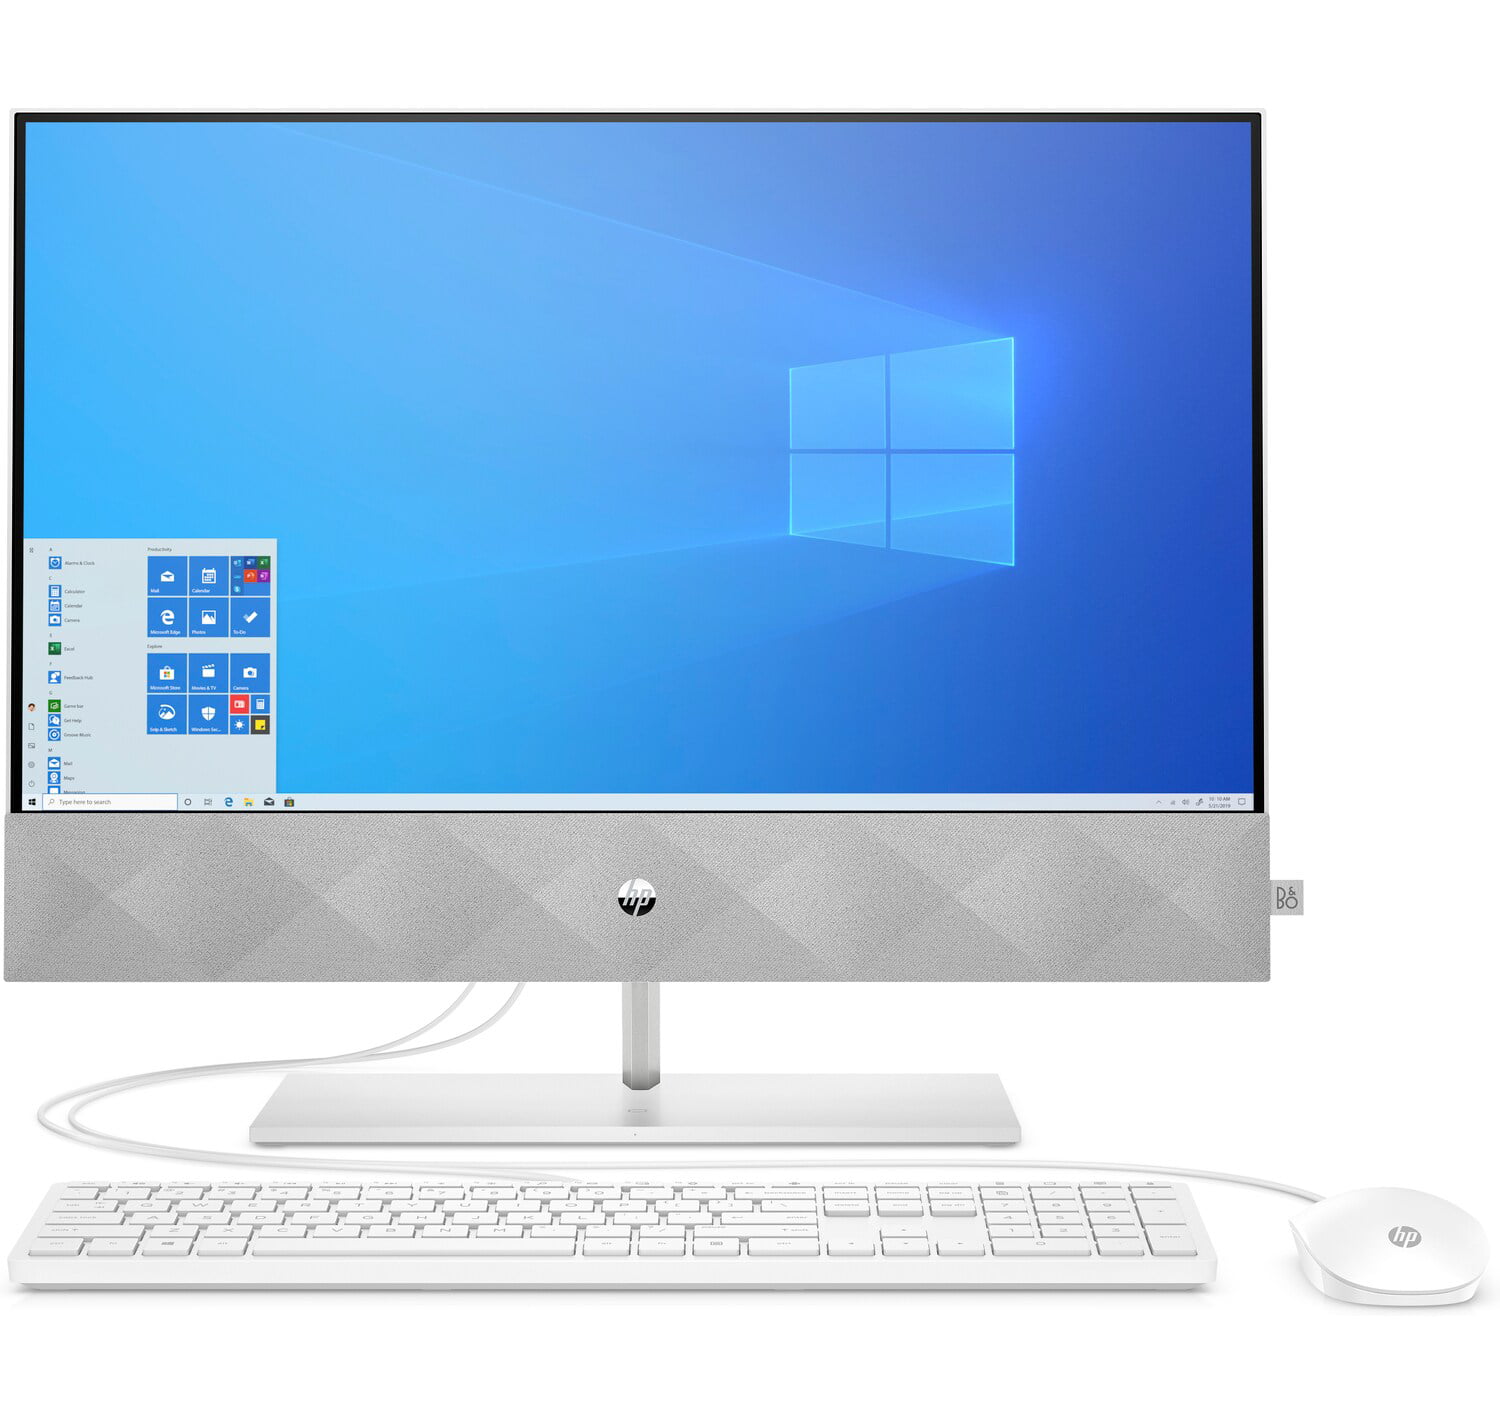 HP Pavilion All-in-One Computer 23.8